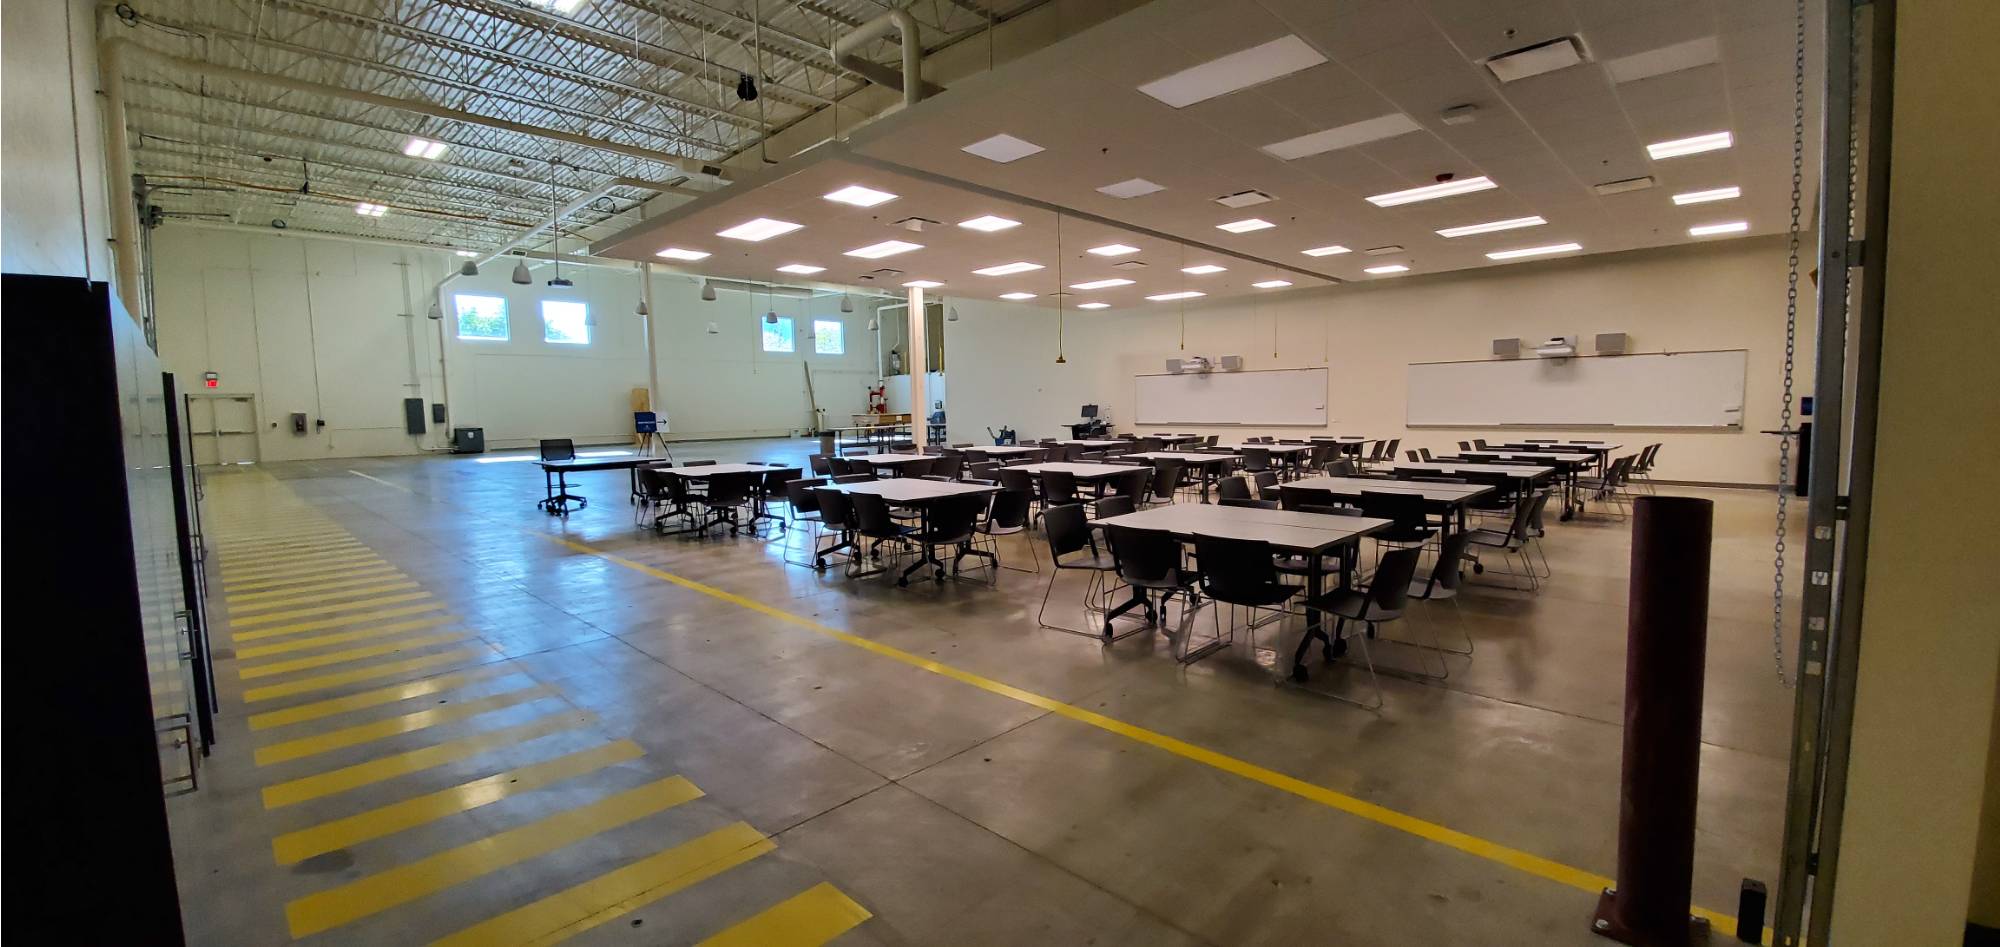 A view of K-12 outreach center set up with pod style seating